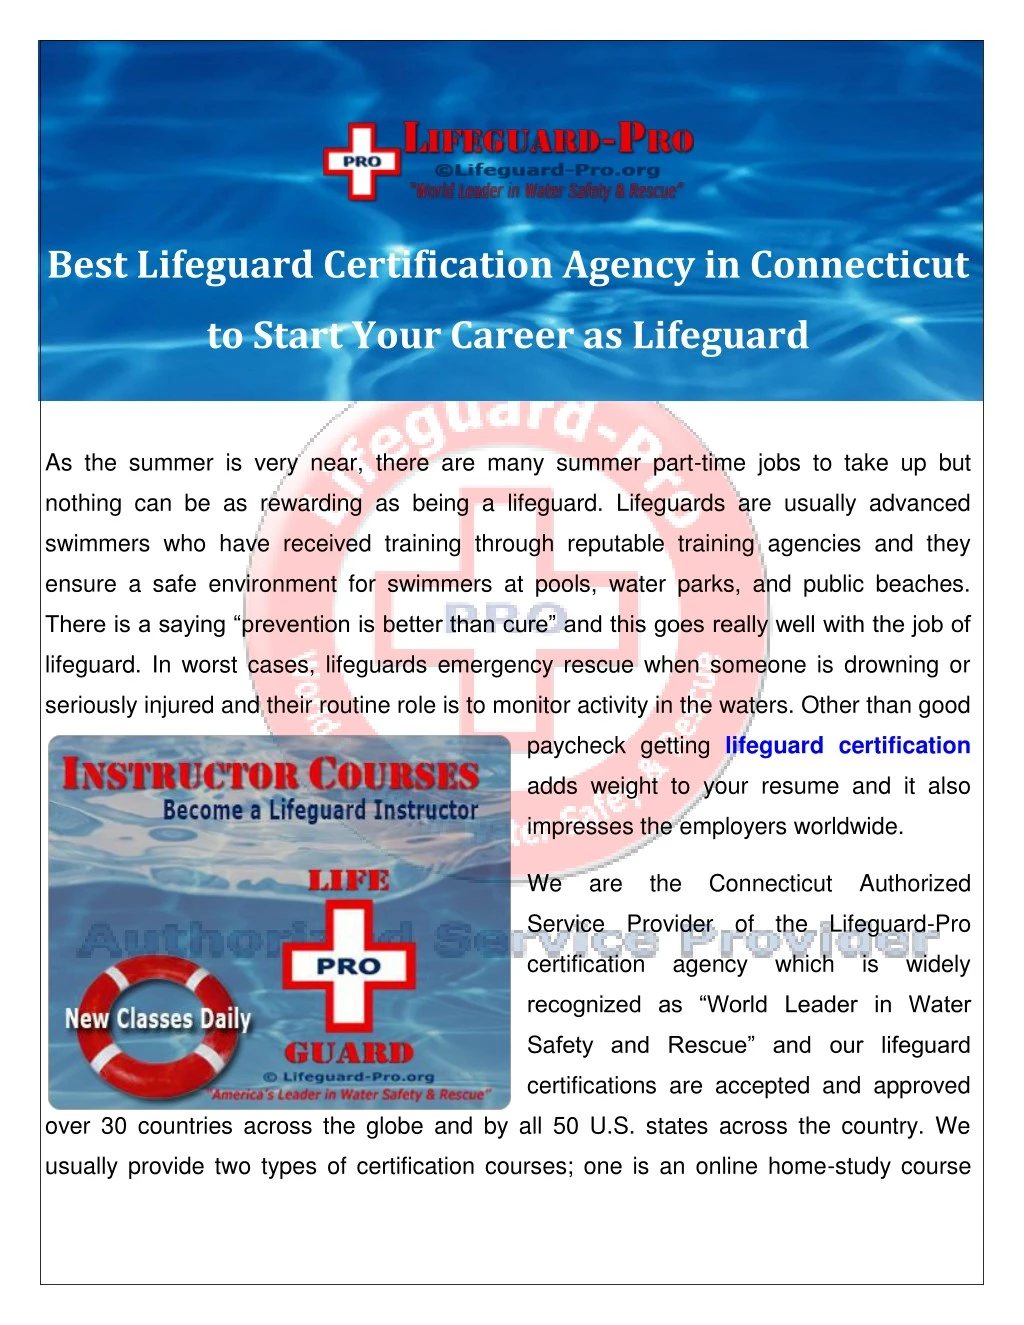 best lifeguard certification agency in connecticut